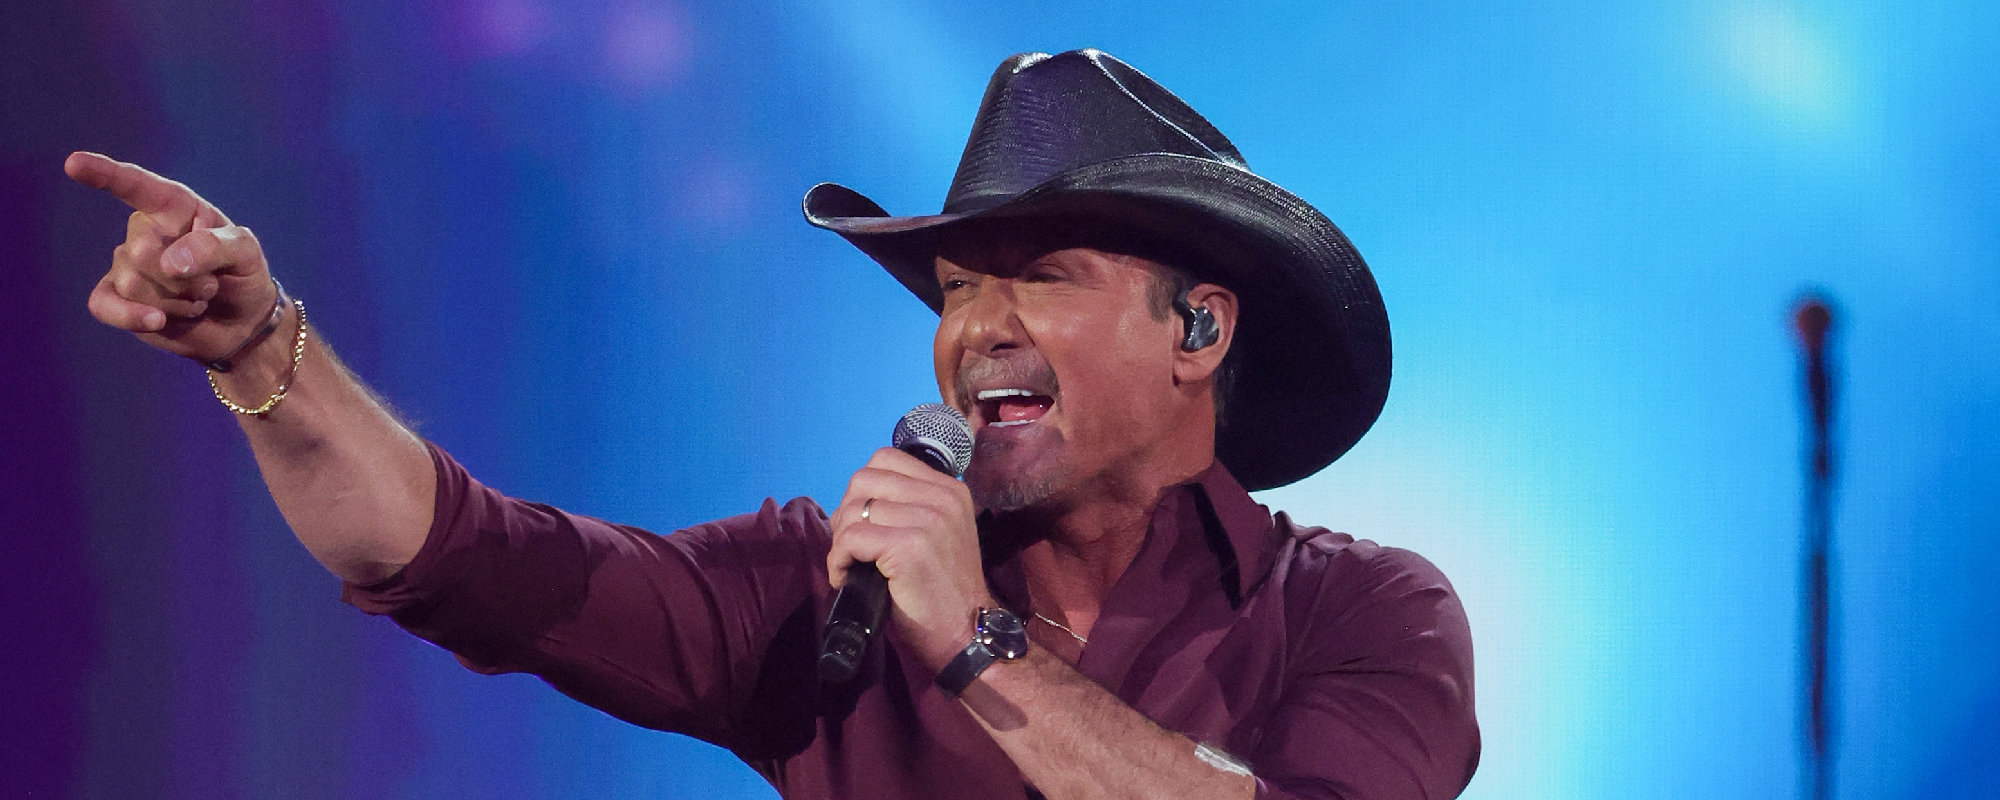 Nelly Crashes Tim McGraw’s St. Louis Concert for Surprise Performance of “Over and Over”